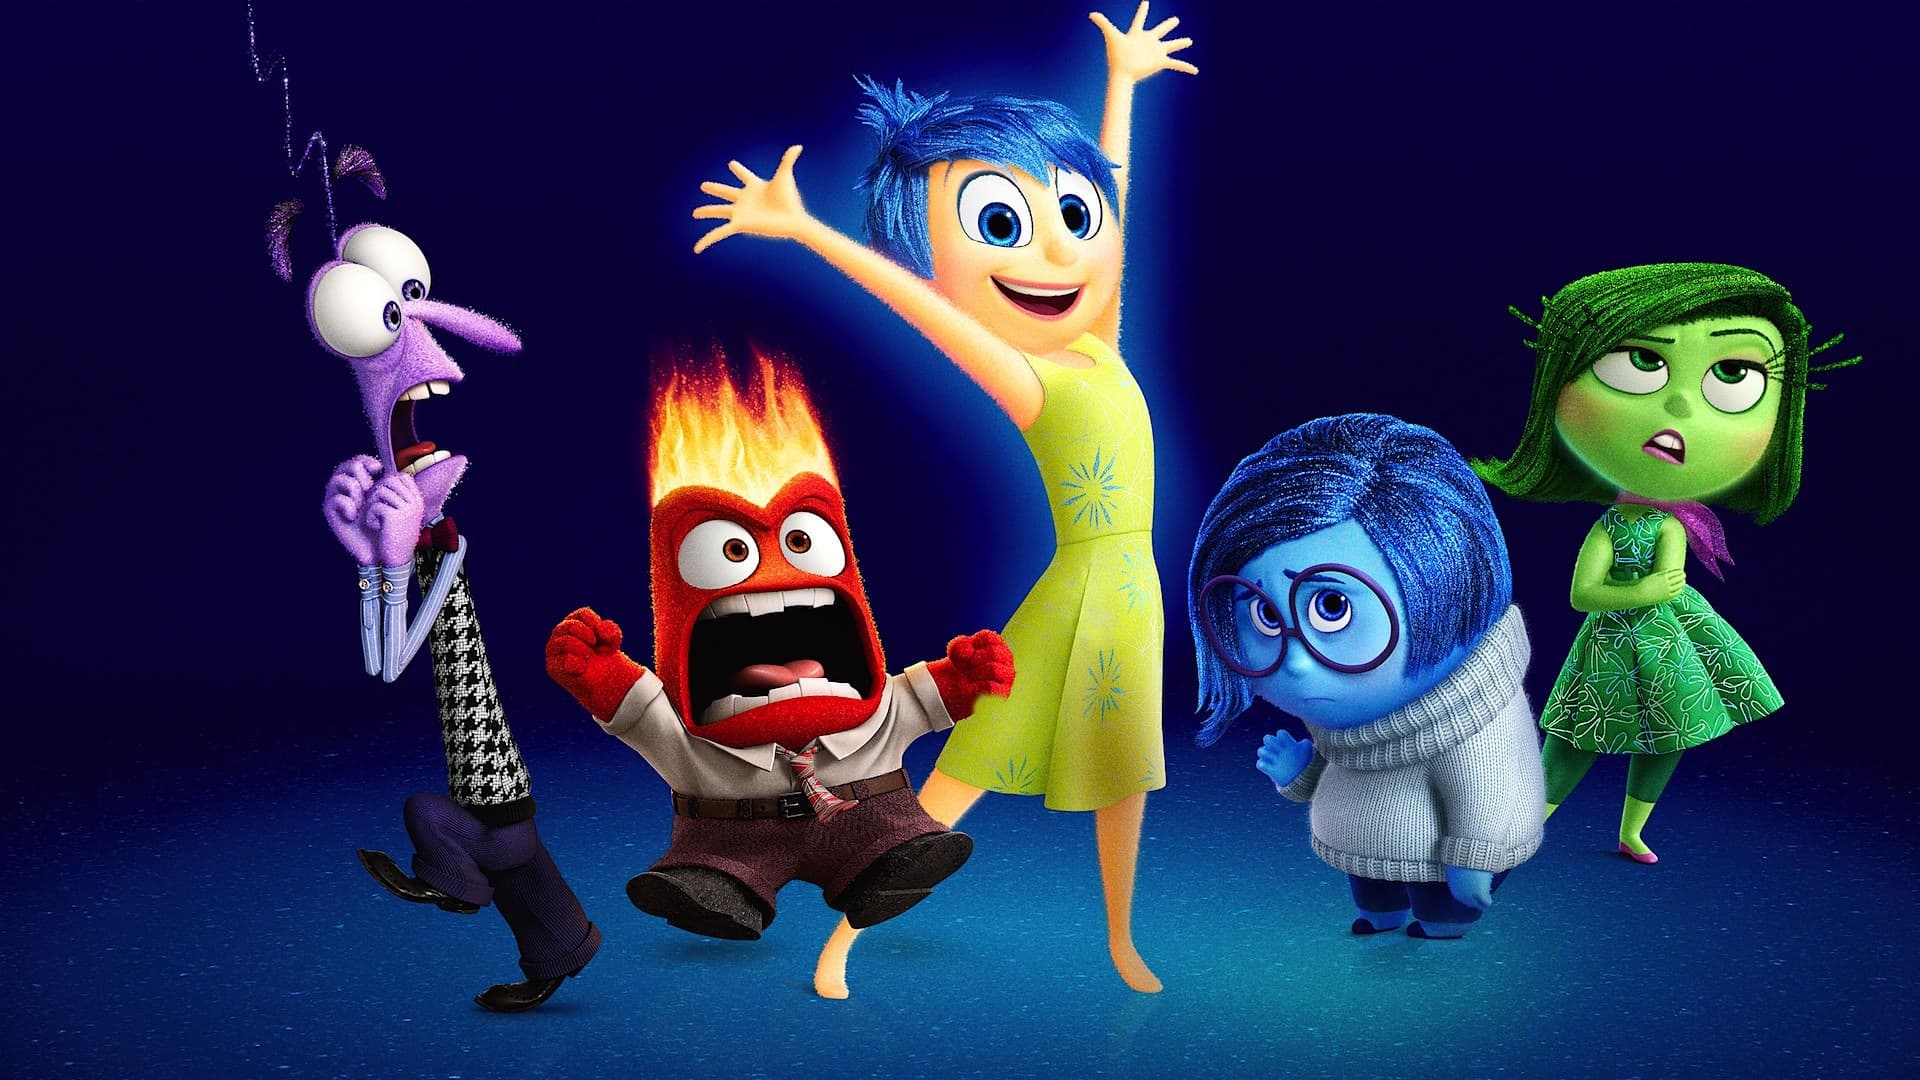 Inside Out wallpapers, Disney Pixar animation, Fun and emotions, Vibrant movie, 1920x1080 Full HD Desktop